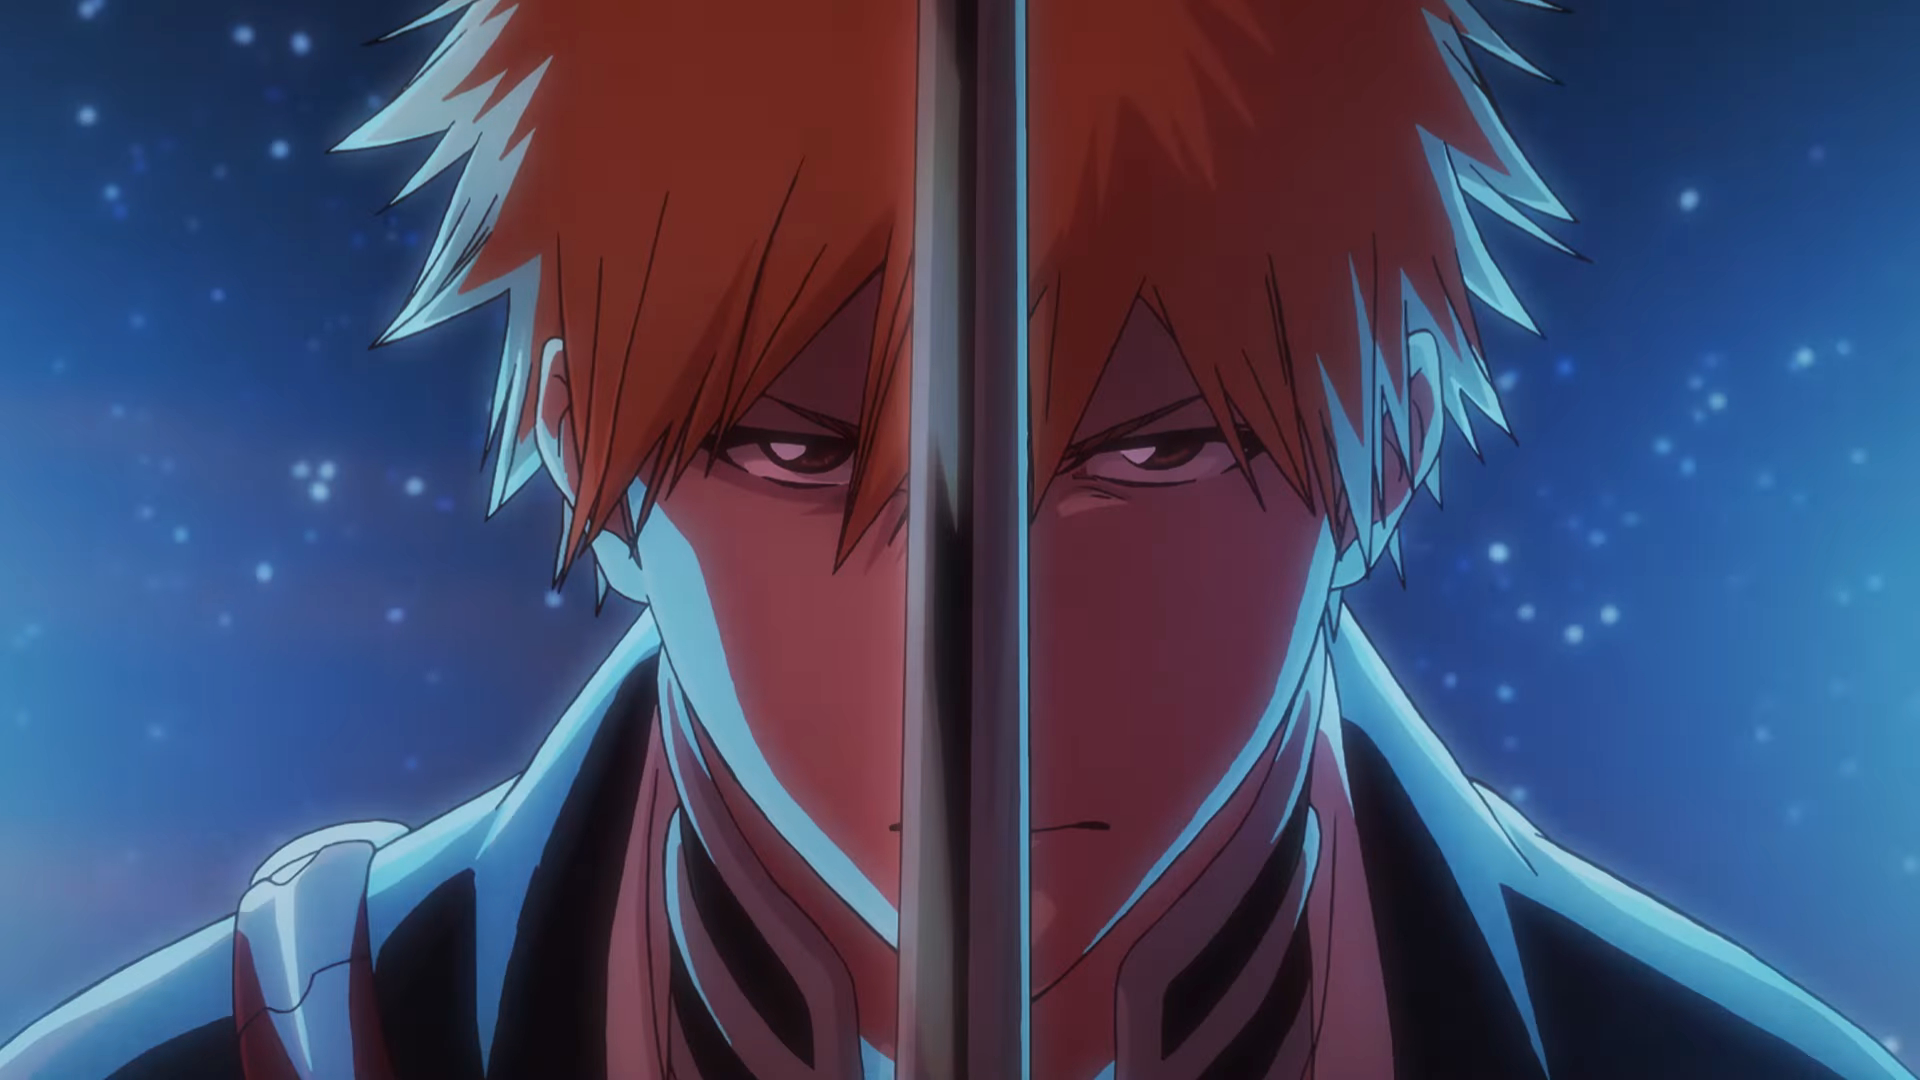 Special ENDING SONG Movie  BLEACH: Thousand-Year Blood War